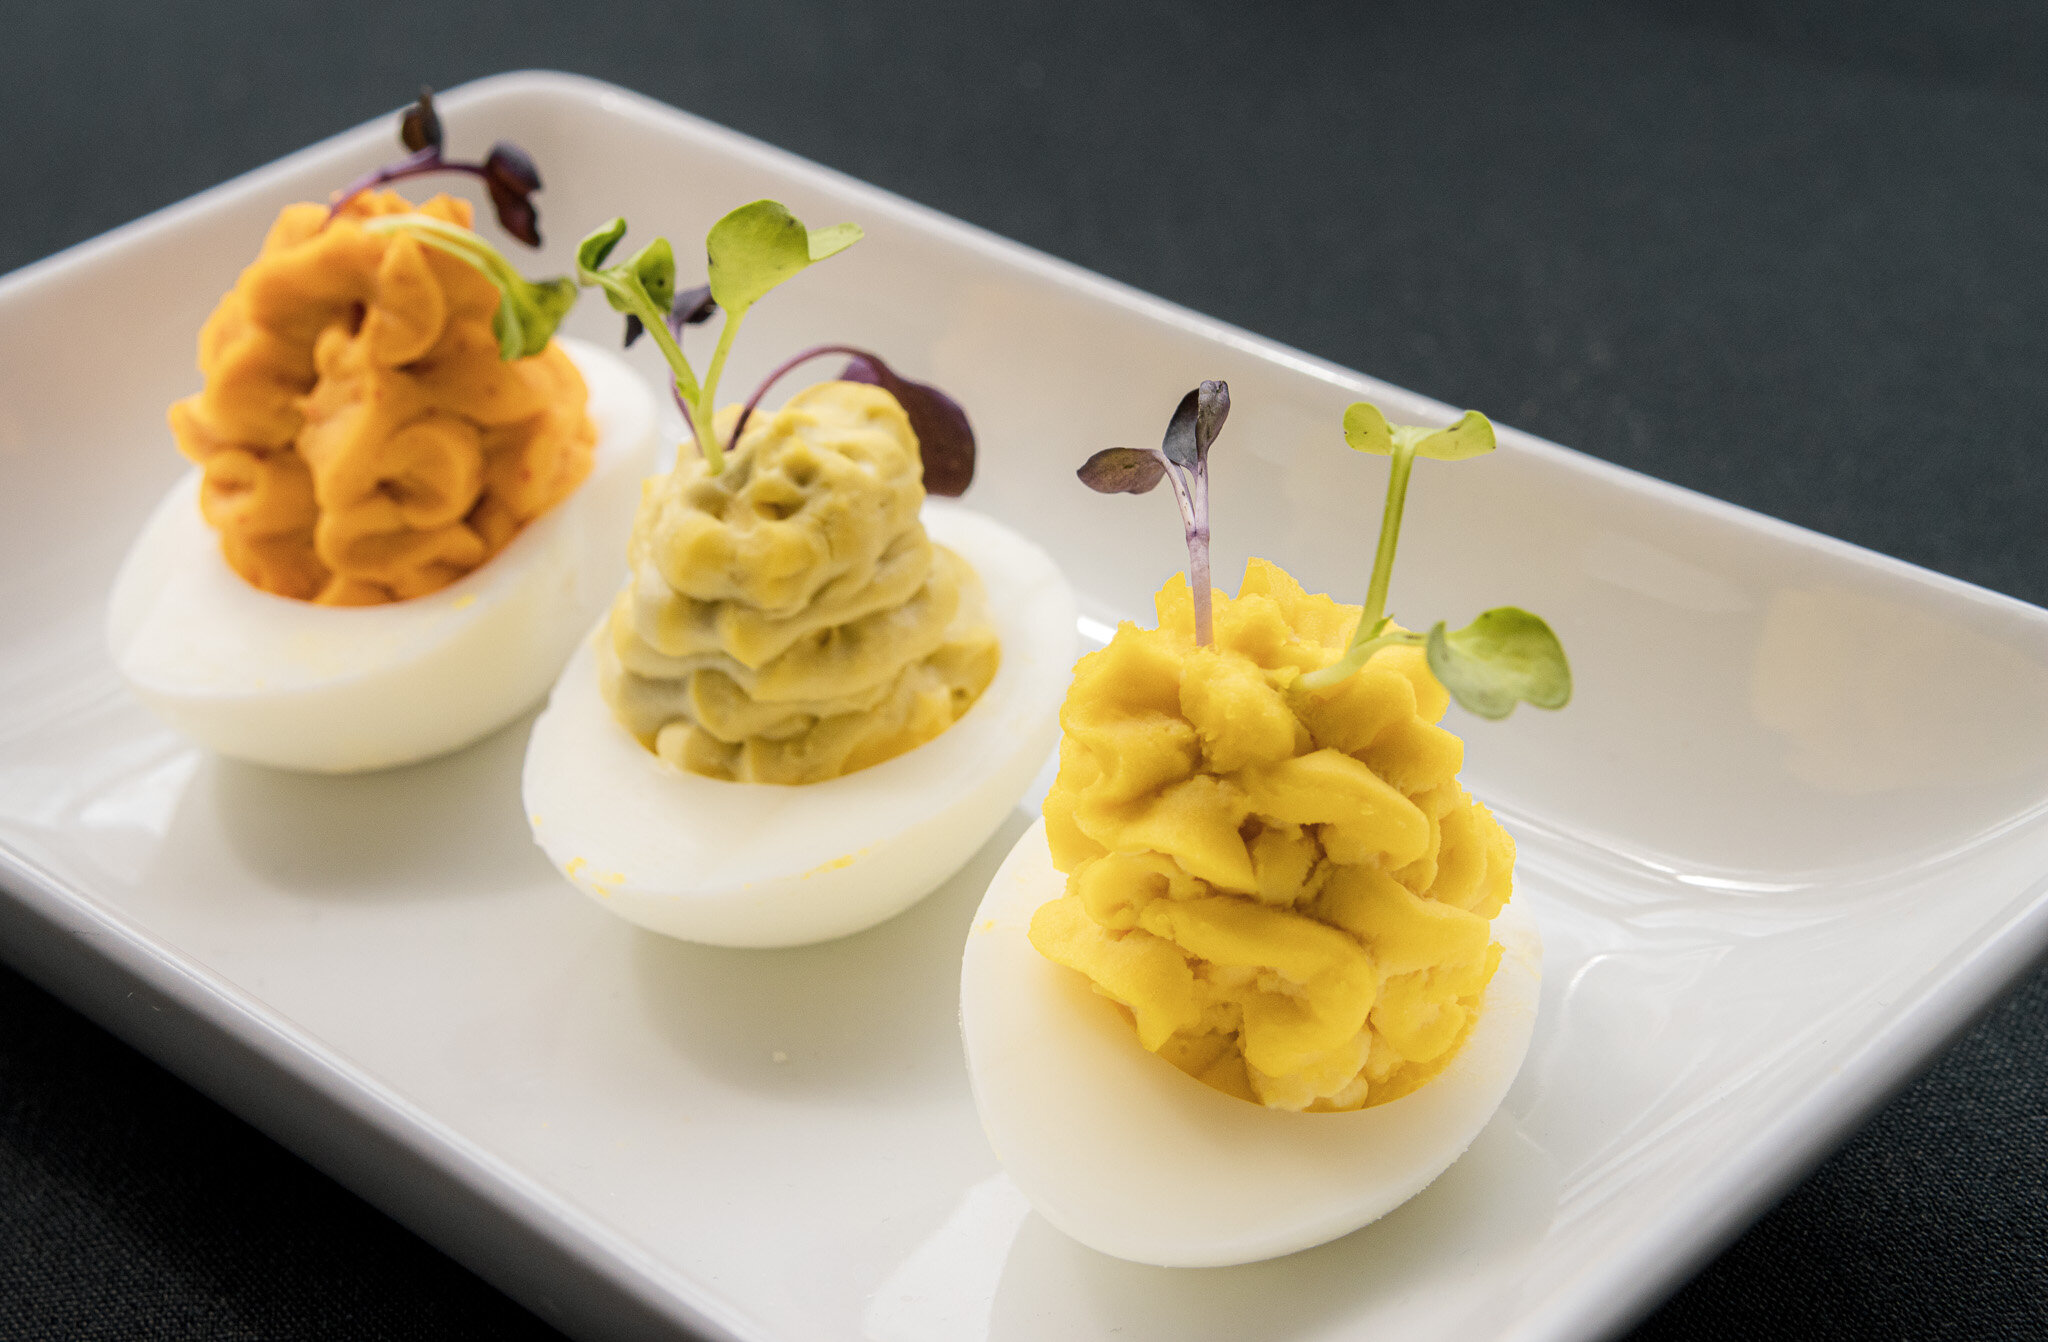 Deviled Egg Flight
guacamole, siracha lime,
traditional 
Open tonight 5pm - 10pm